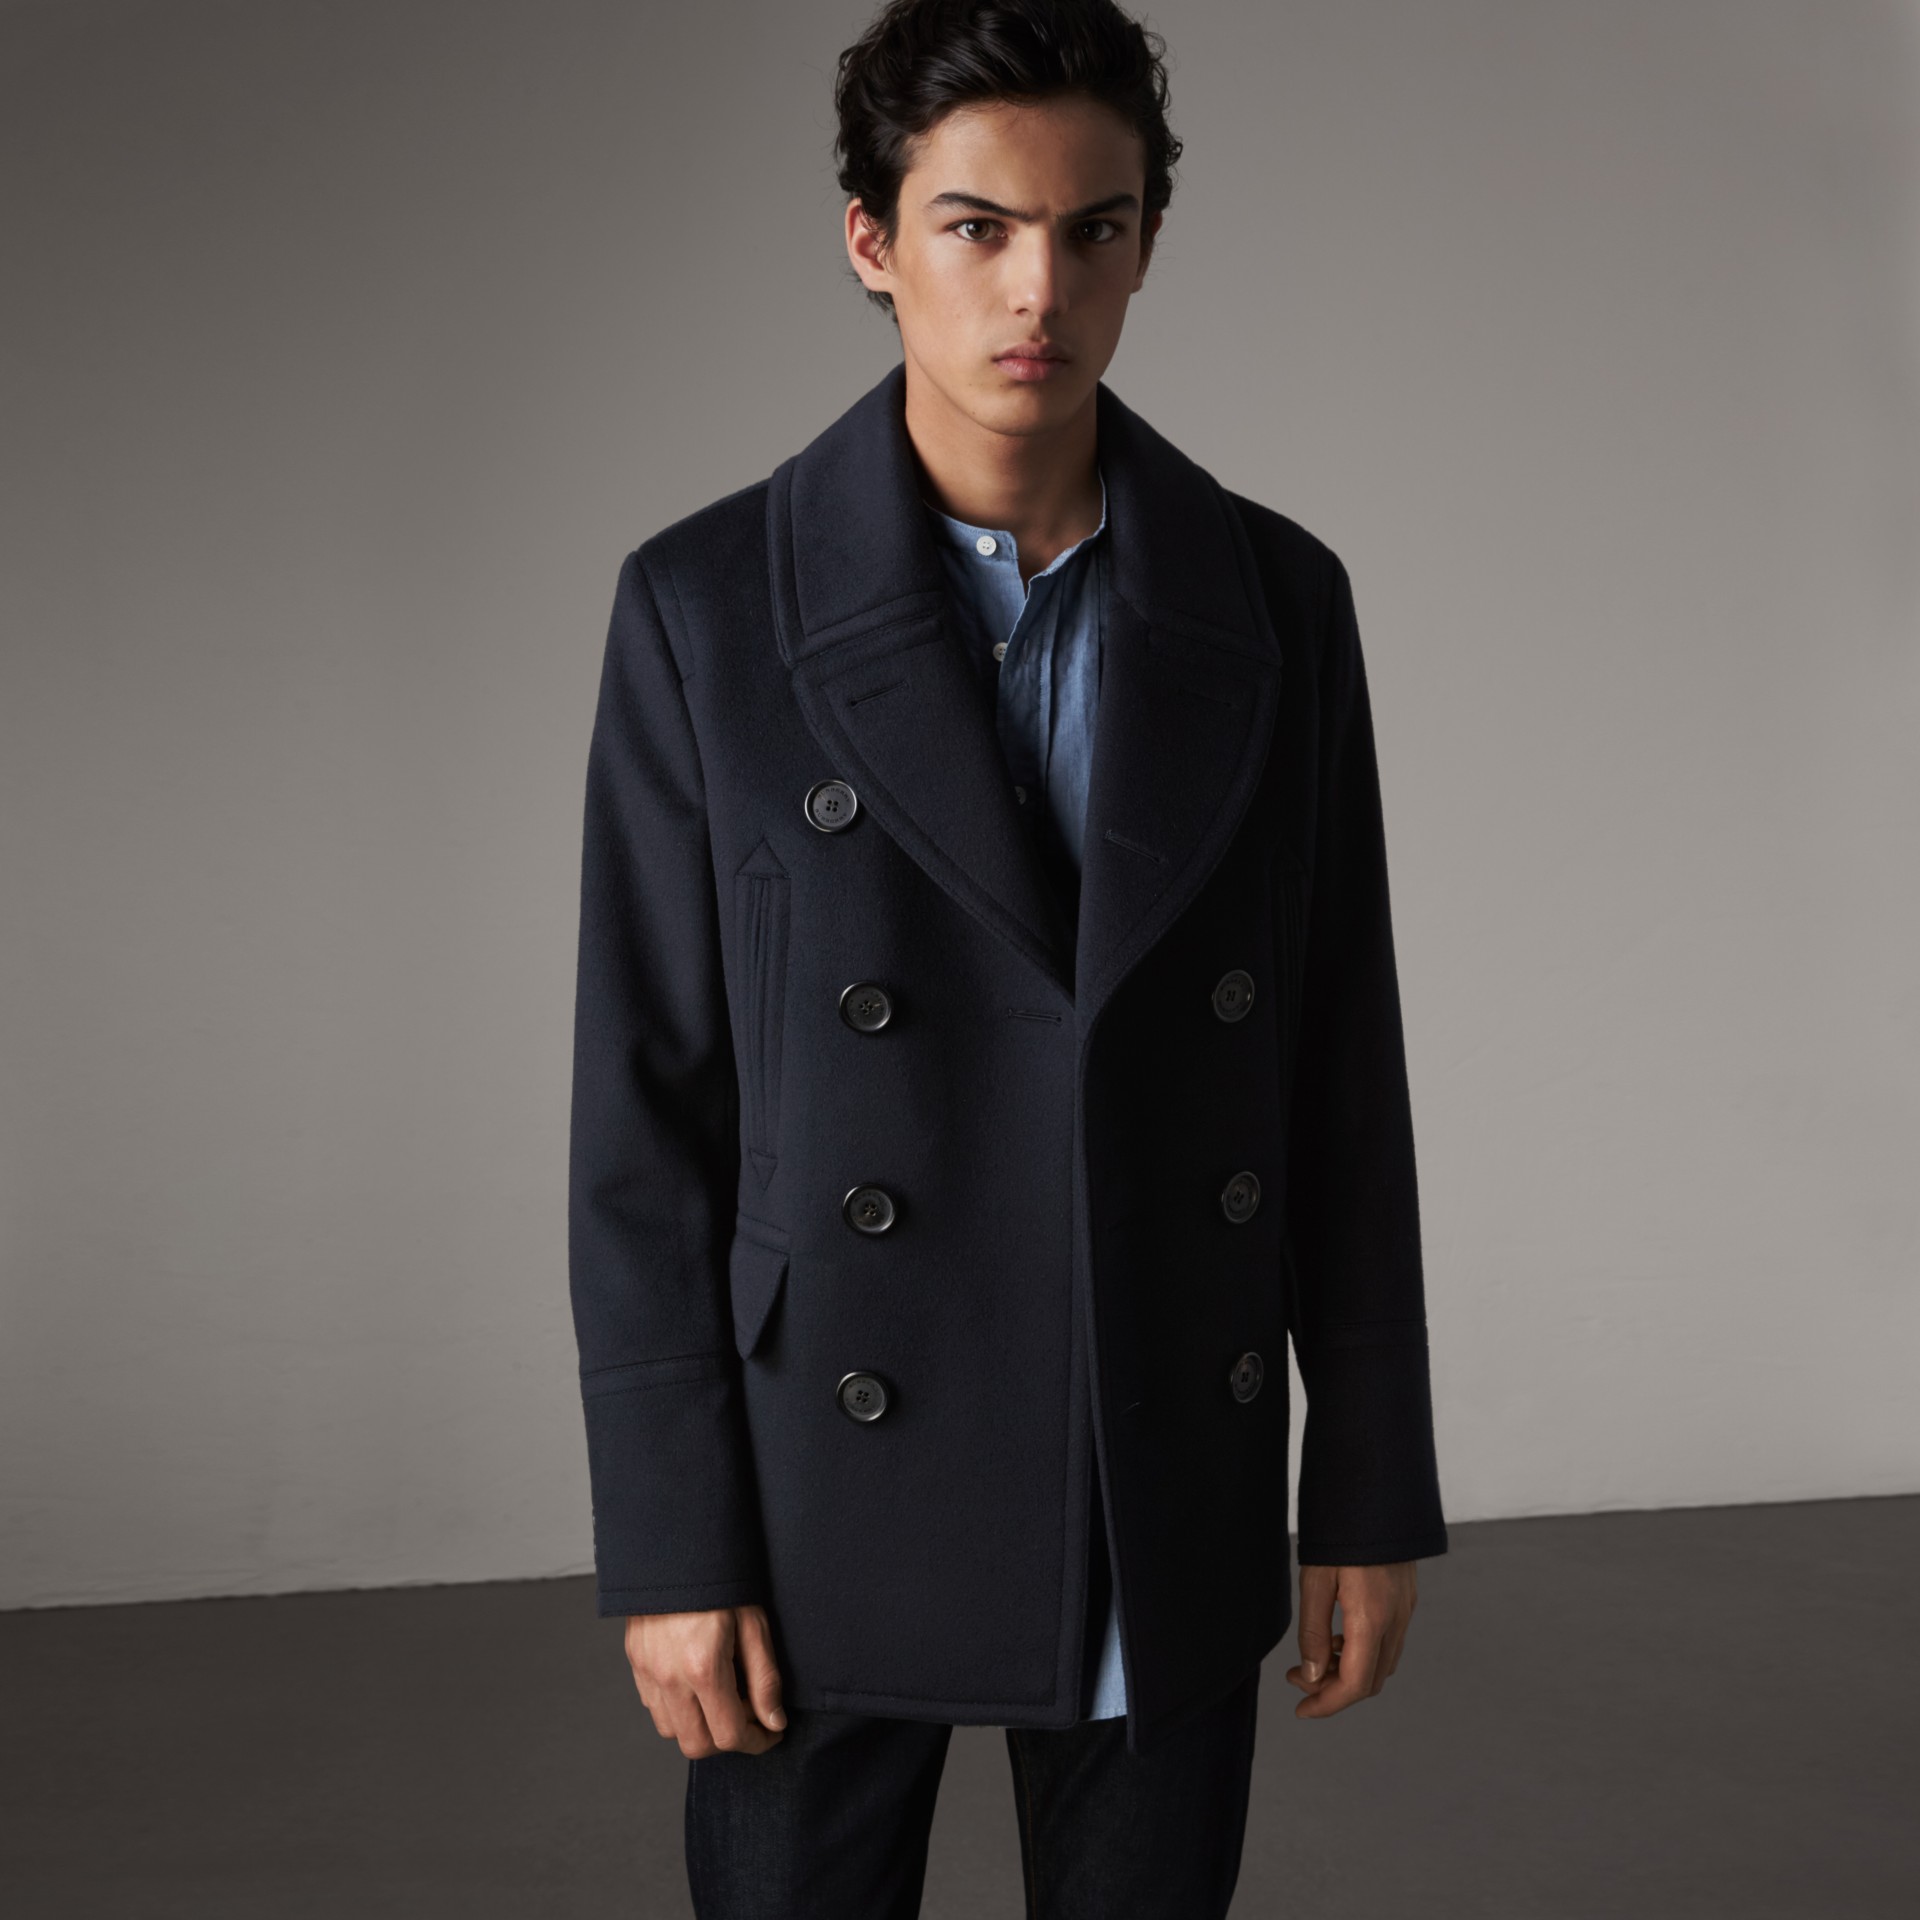 Wool Cashmere Pea Coat in Navy - Men | Burberry United States